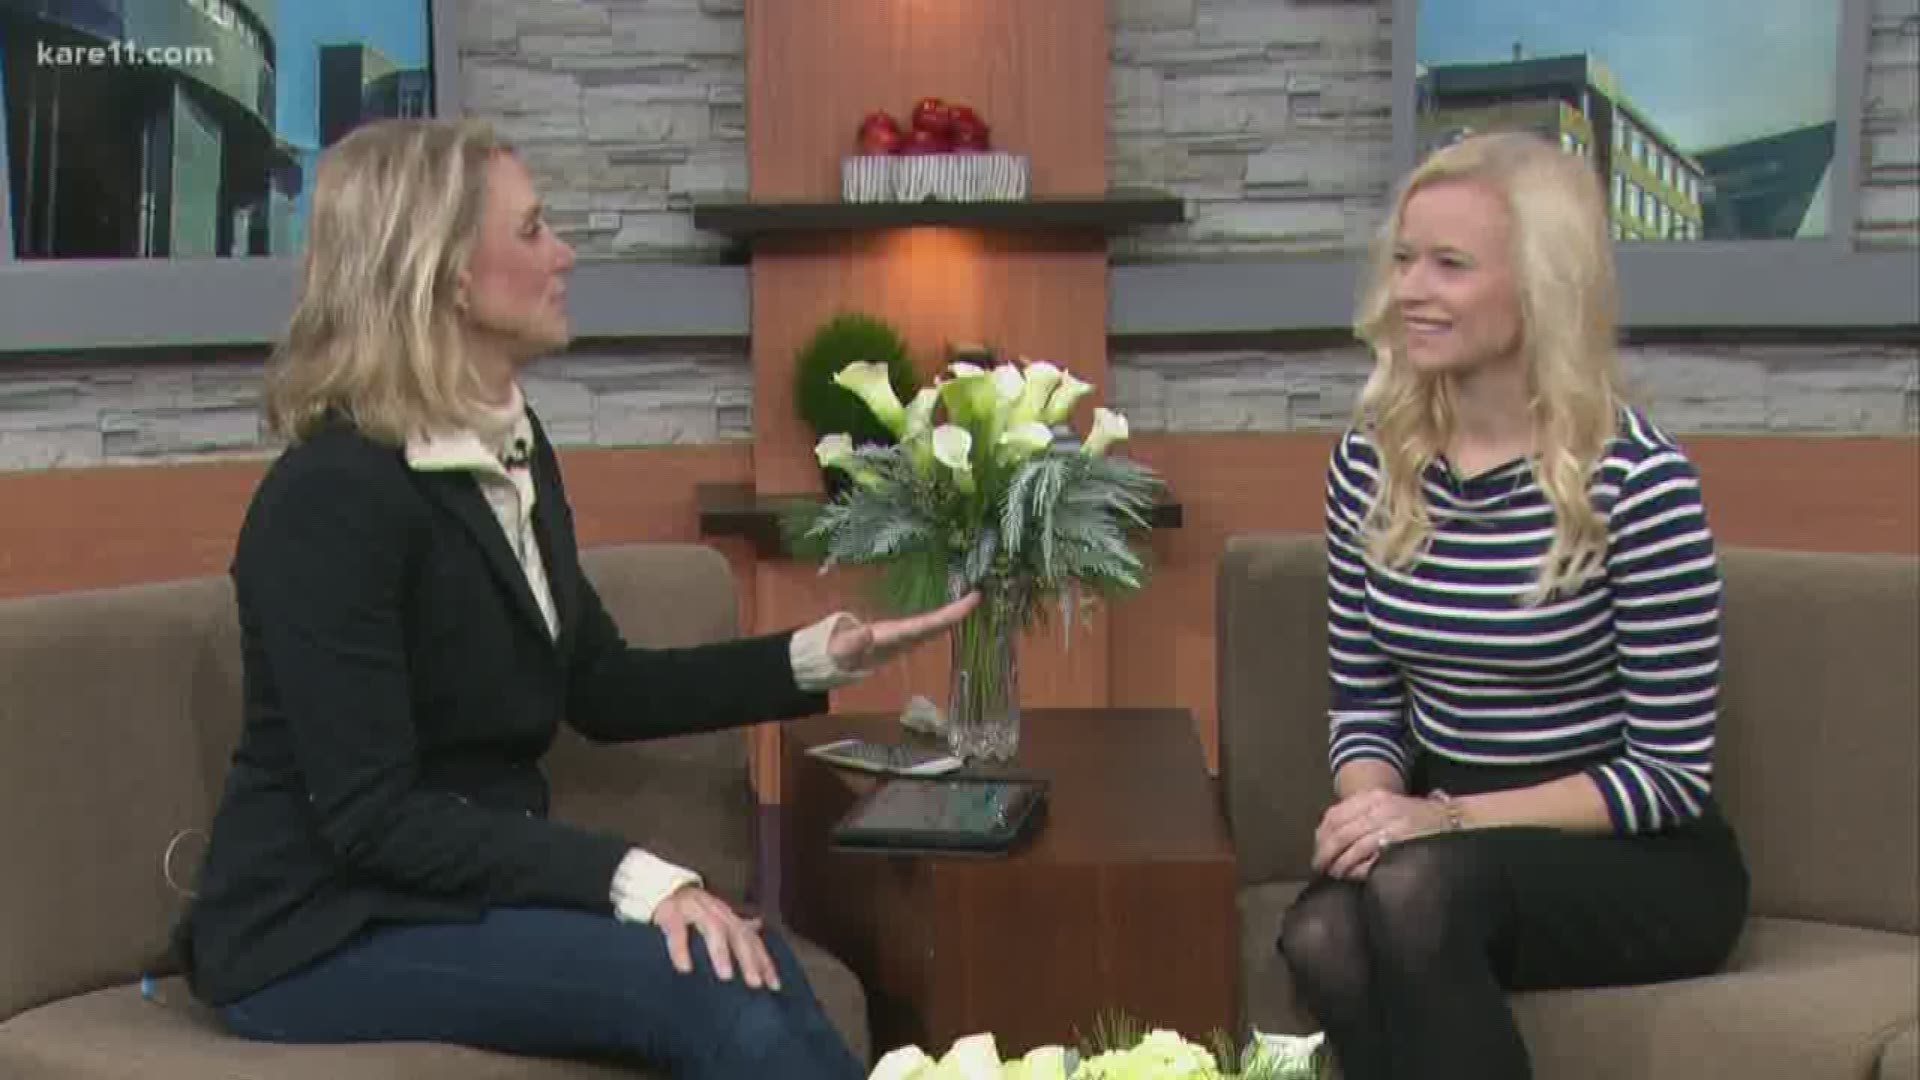 Travel expert Michelle Niven is here with a few great options to consider.